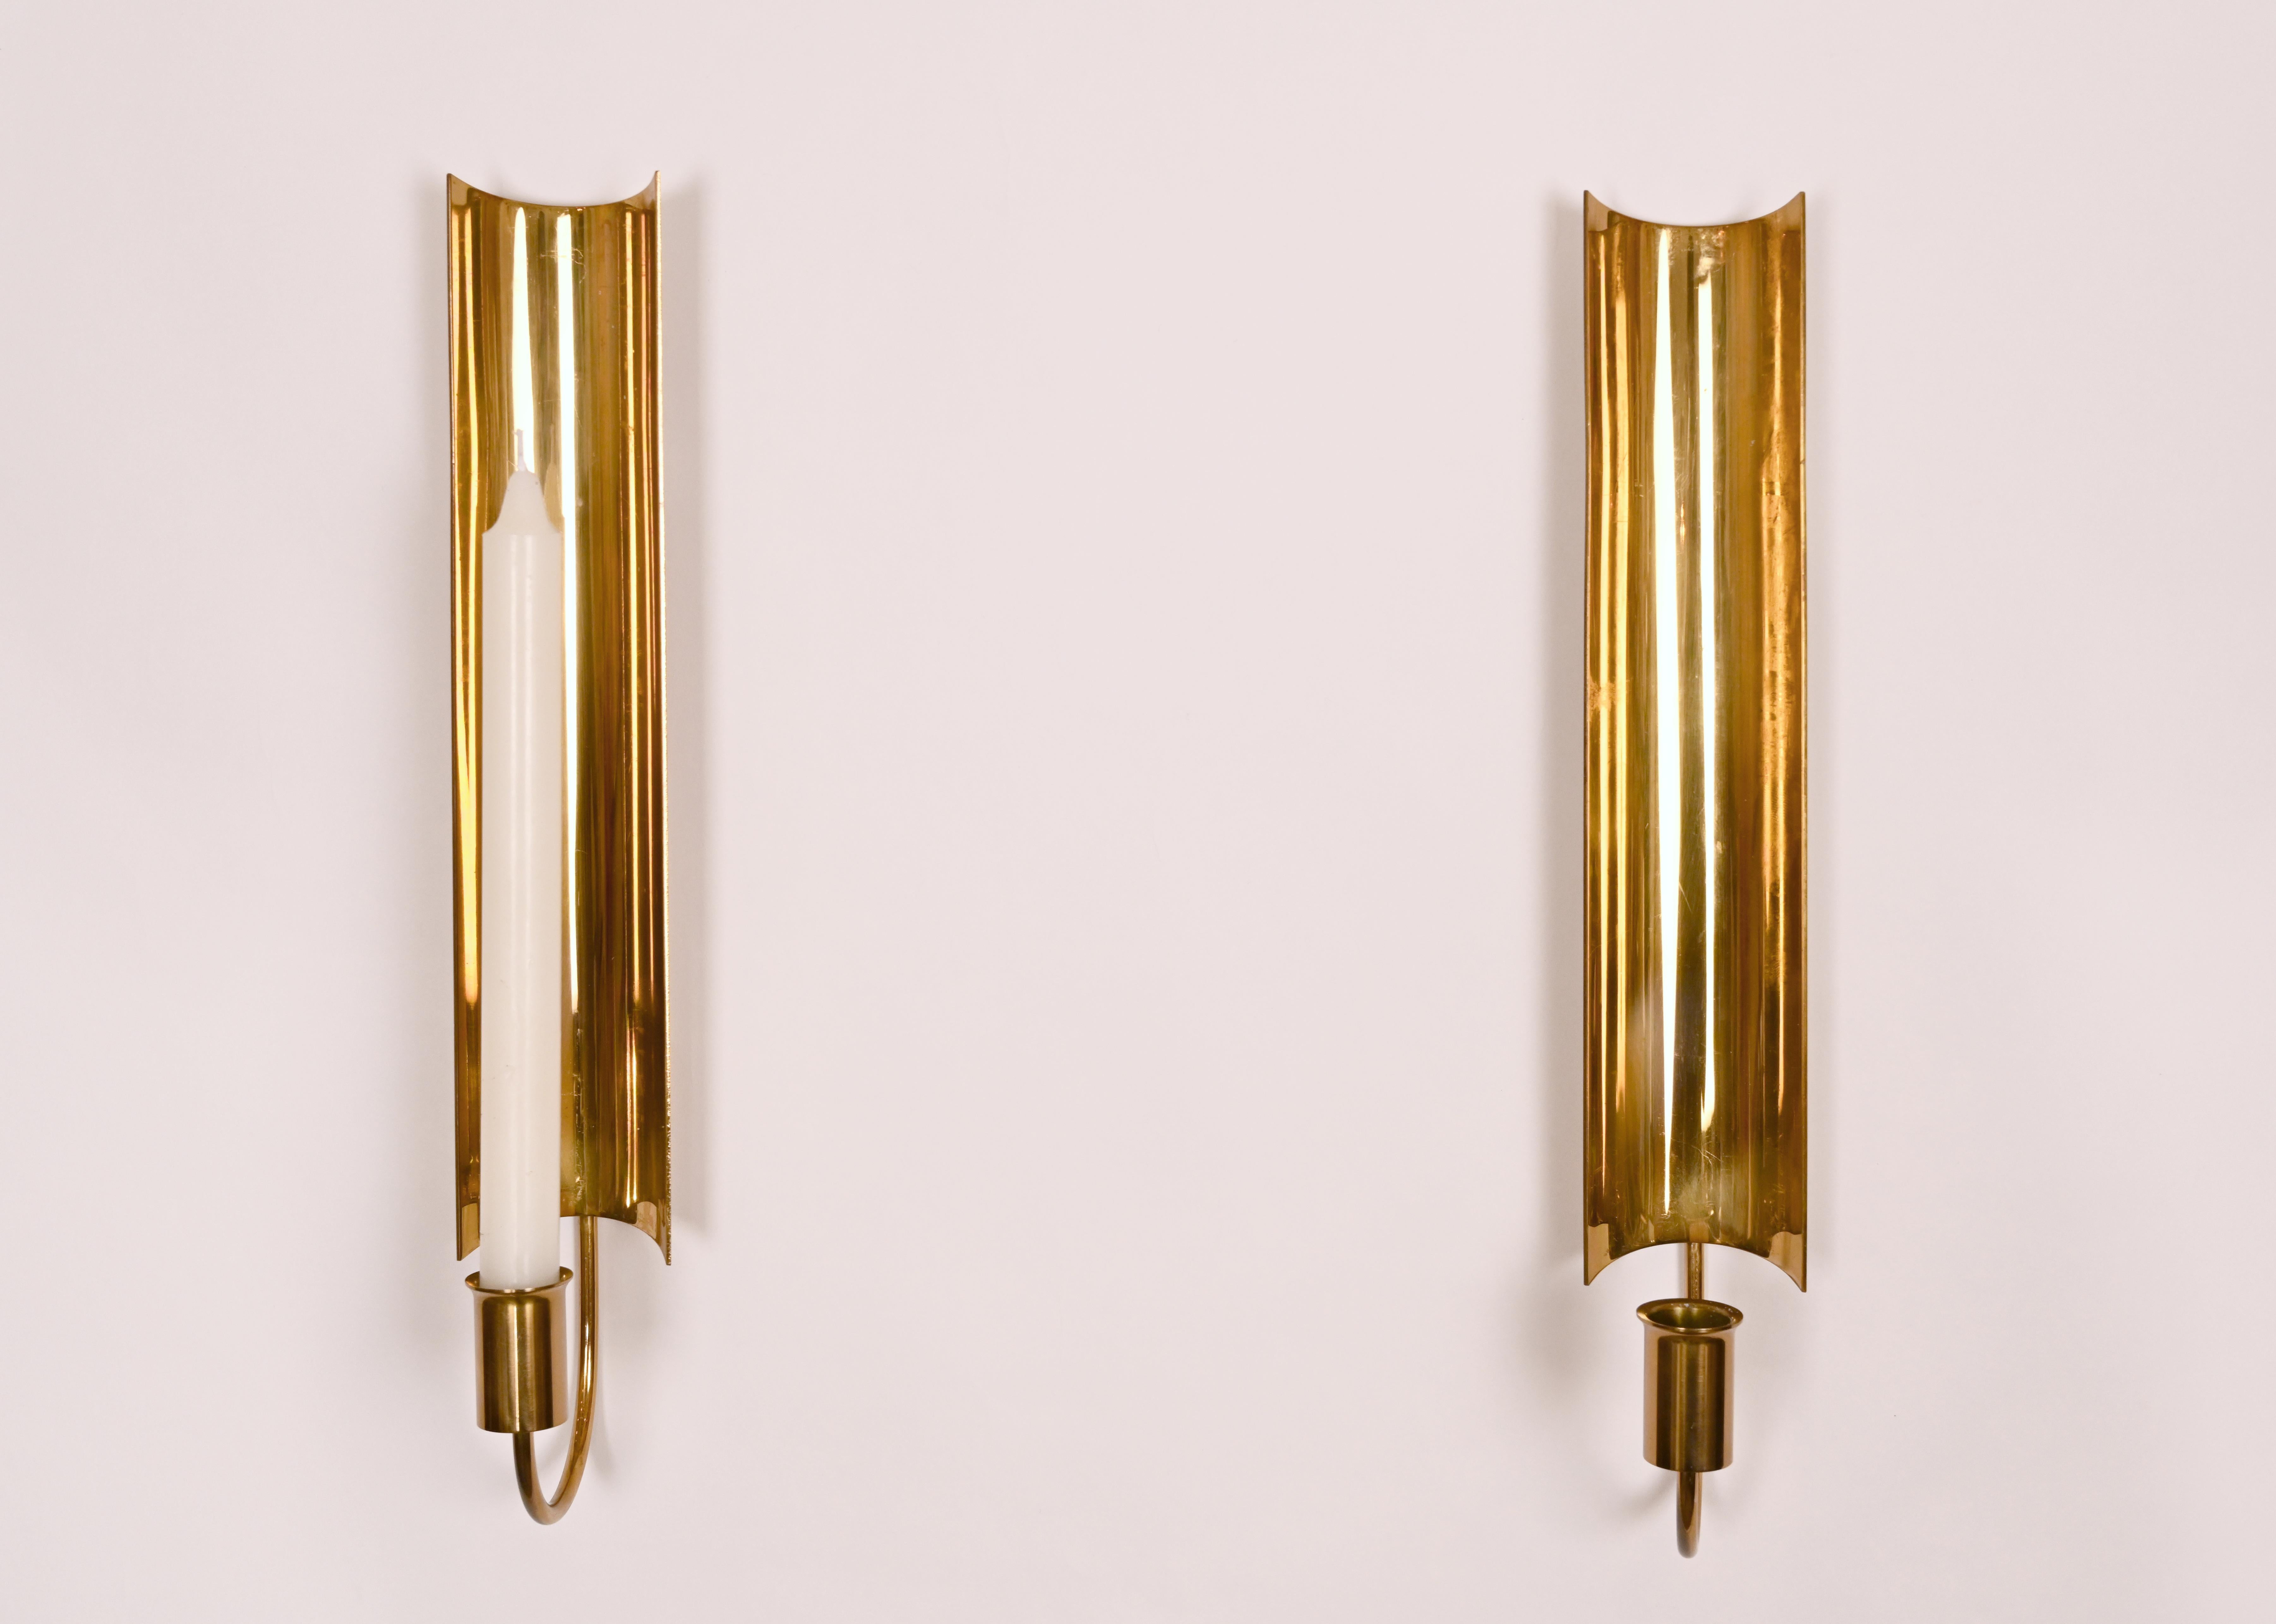 Pierre Forssell (1925-2004) Brass Sconces for Skultuna. Skultuna label on the back. Wiring included in pricing.